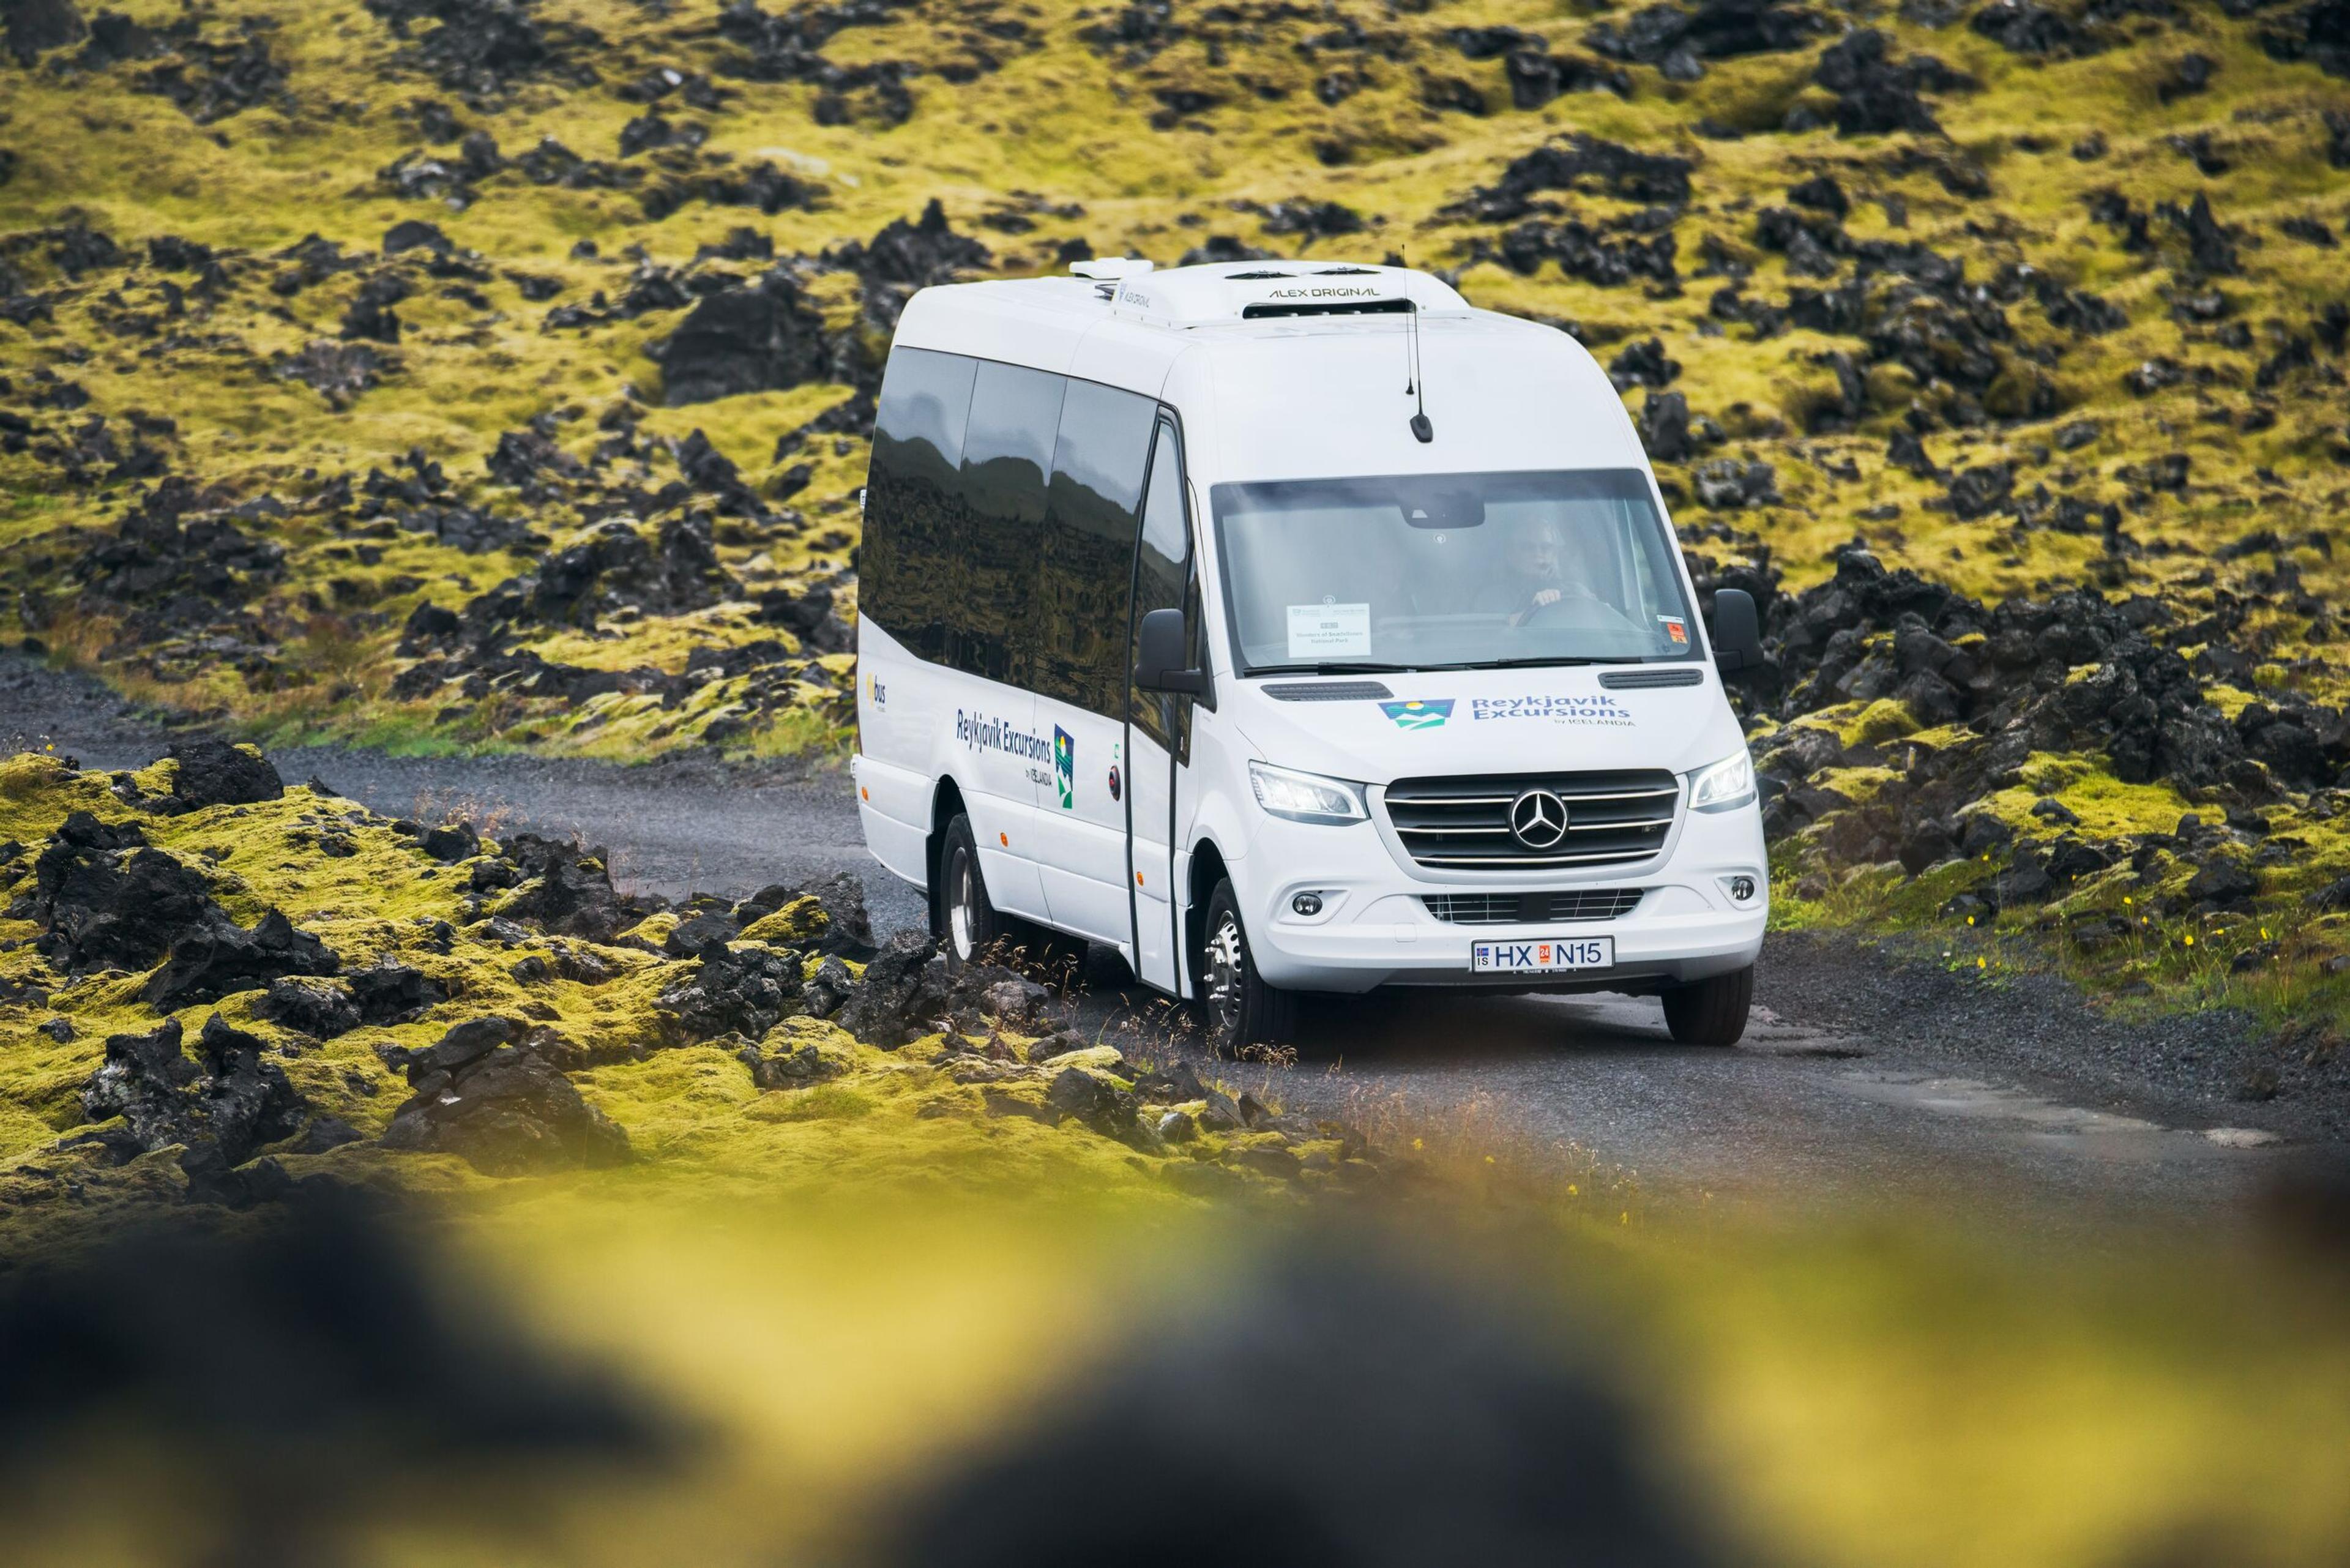 Minibus journeying along an unpaved road, surrounded by a vast expanse of vibrant green moss.